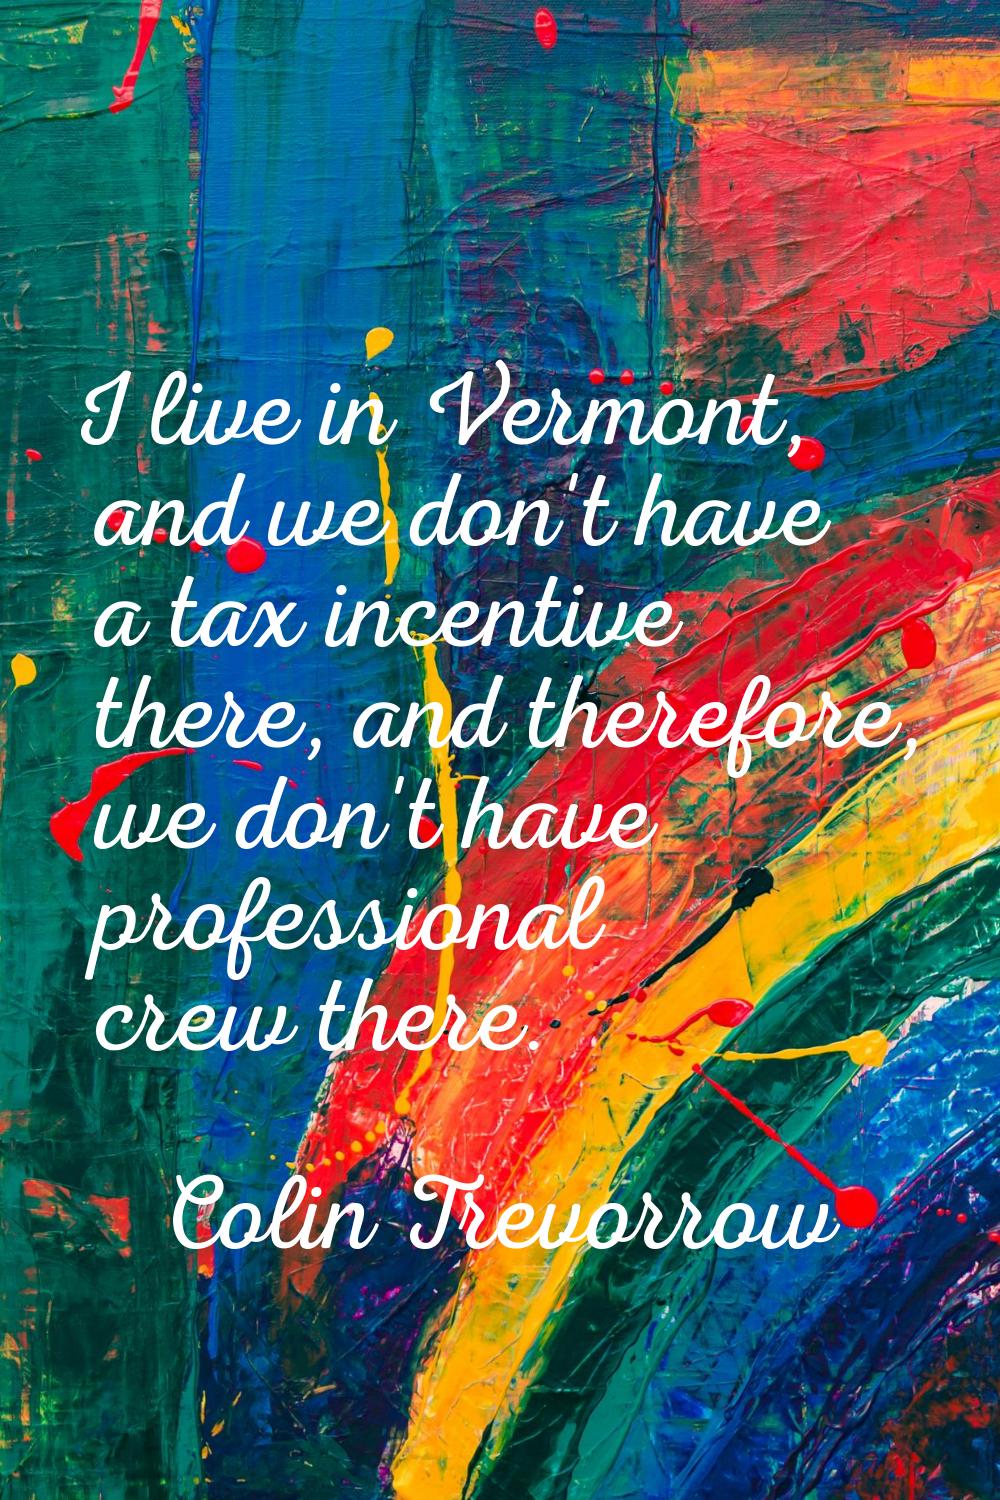 I live in Vermont, and we don't have a tax incentive there, and therefore, we don't have profession